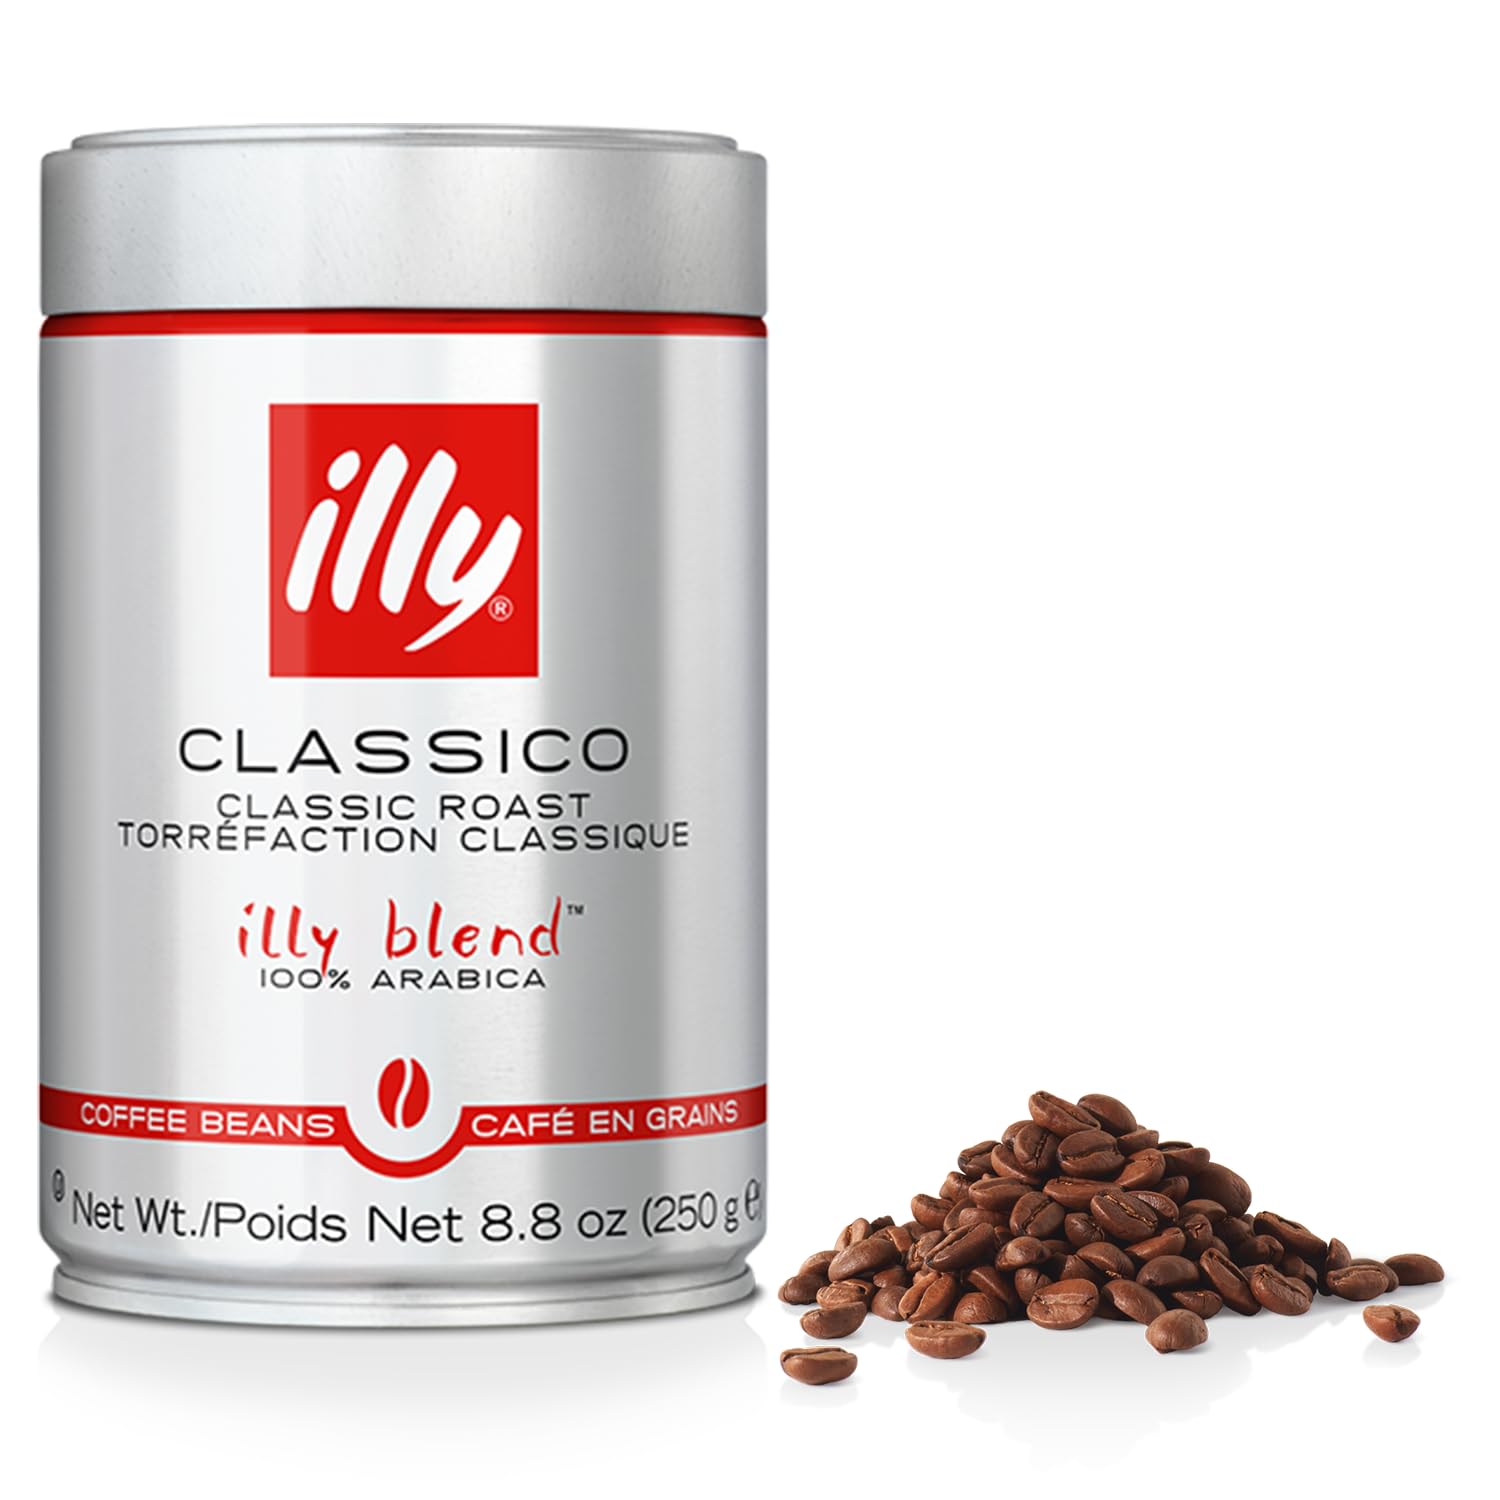 illy Classico Whole Bean Coffee, Medium Roast, Classic Roast with Notes Of Caramel, Orange Blossom and Jasmine, 100% Arabica Coffee, No Preservatives, 8.8 Ounce Can (Pack of 1)